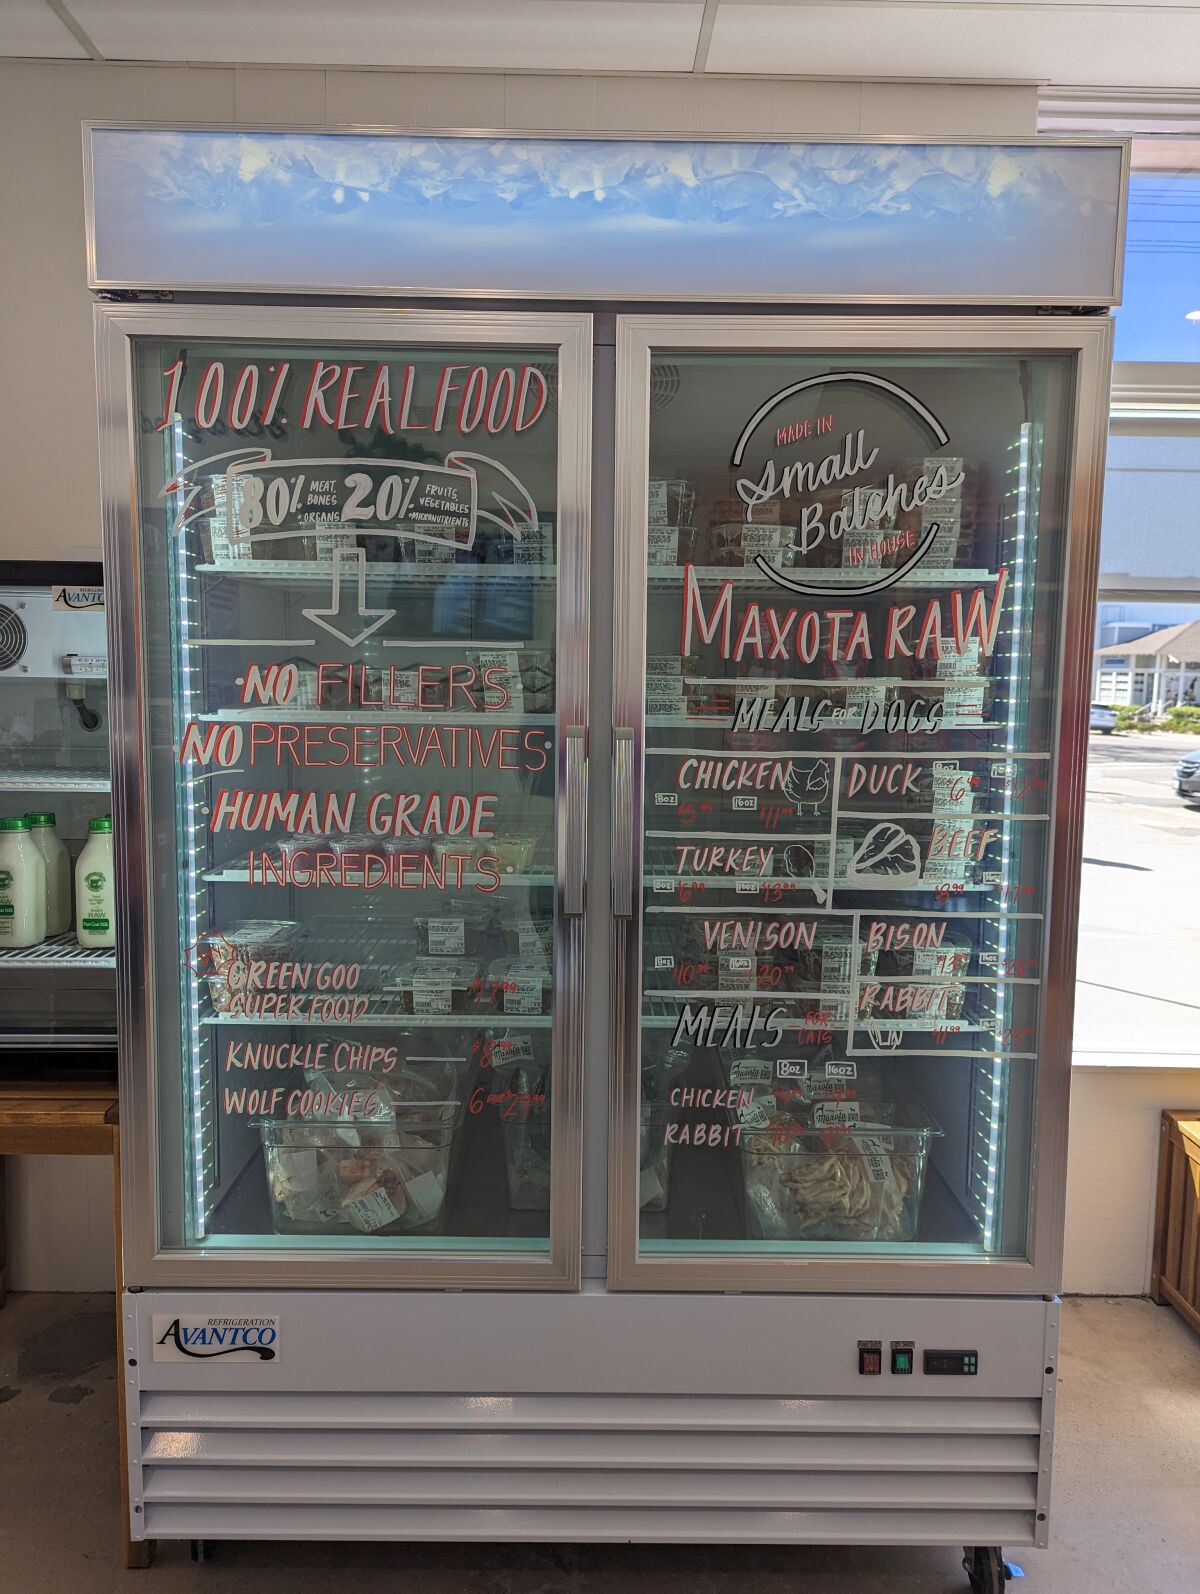 The Maxota Raw dog food made at Urban Wolf is kept in a refrigerator onsite.